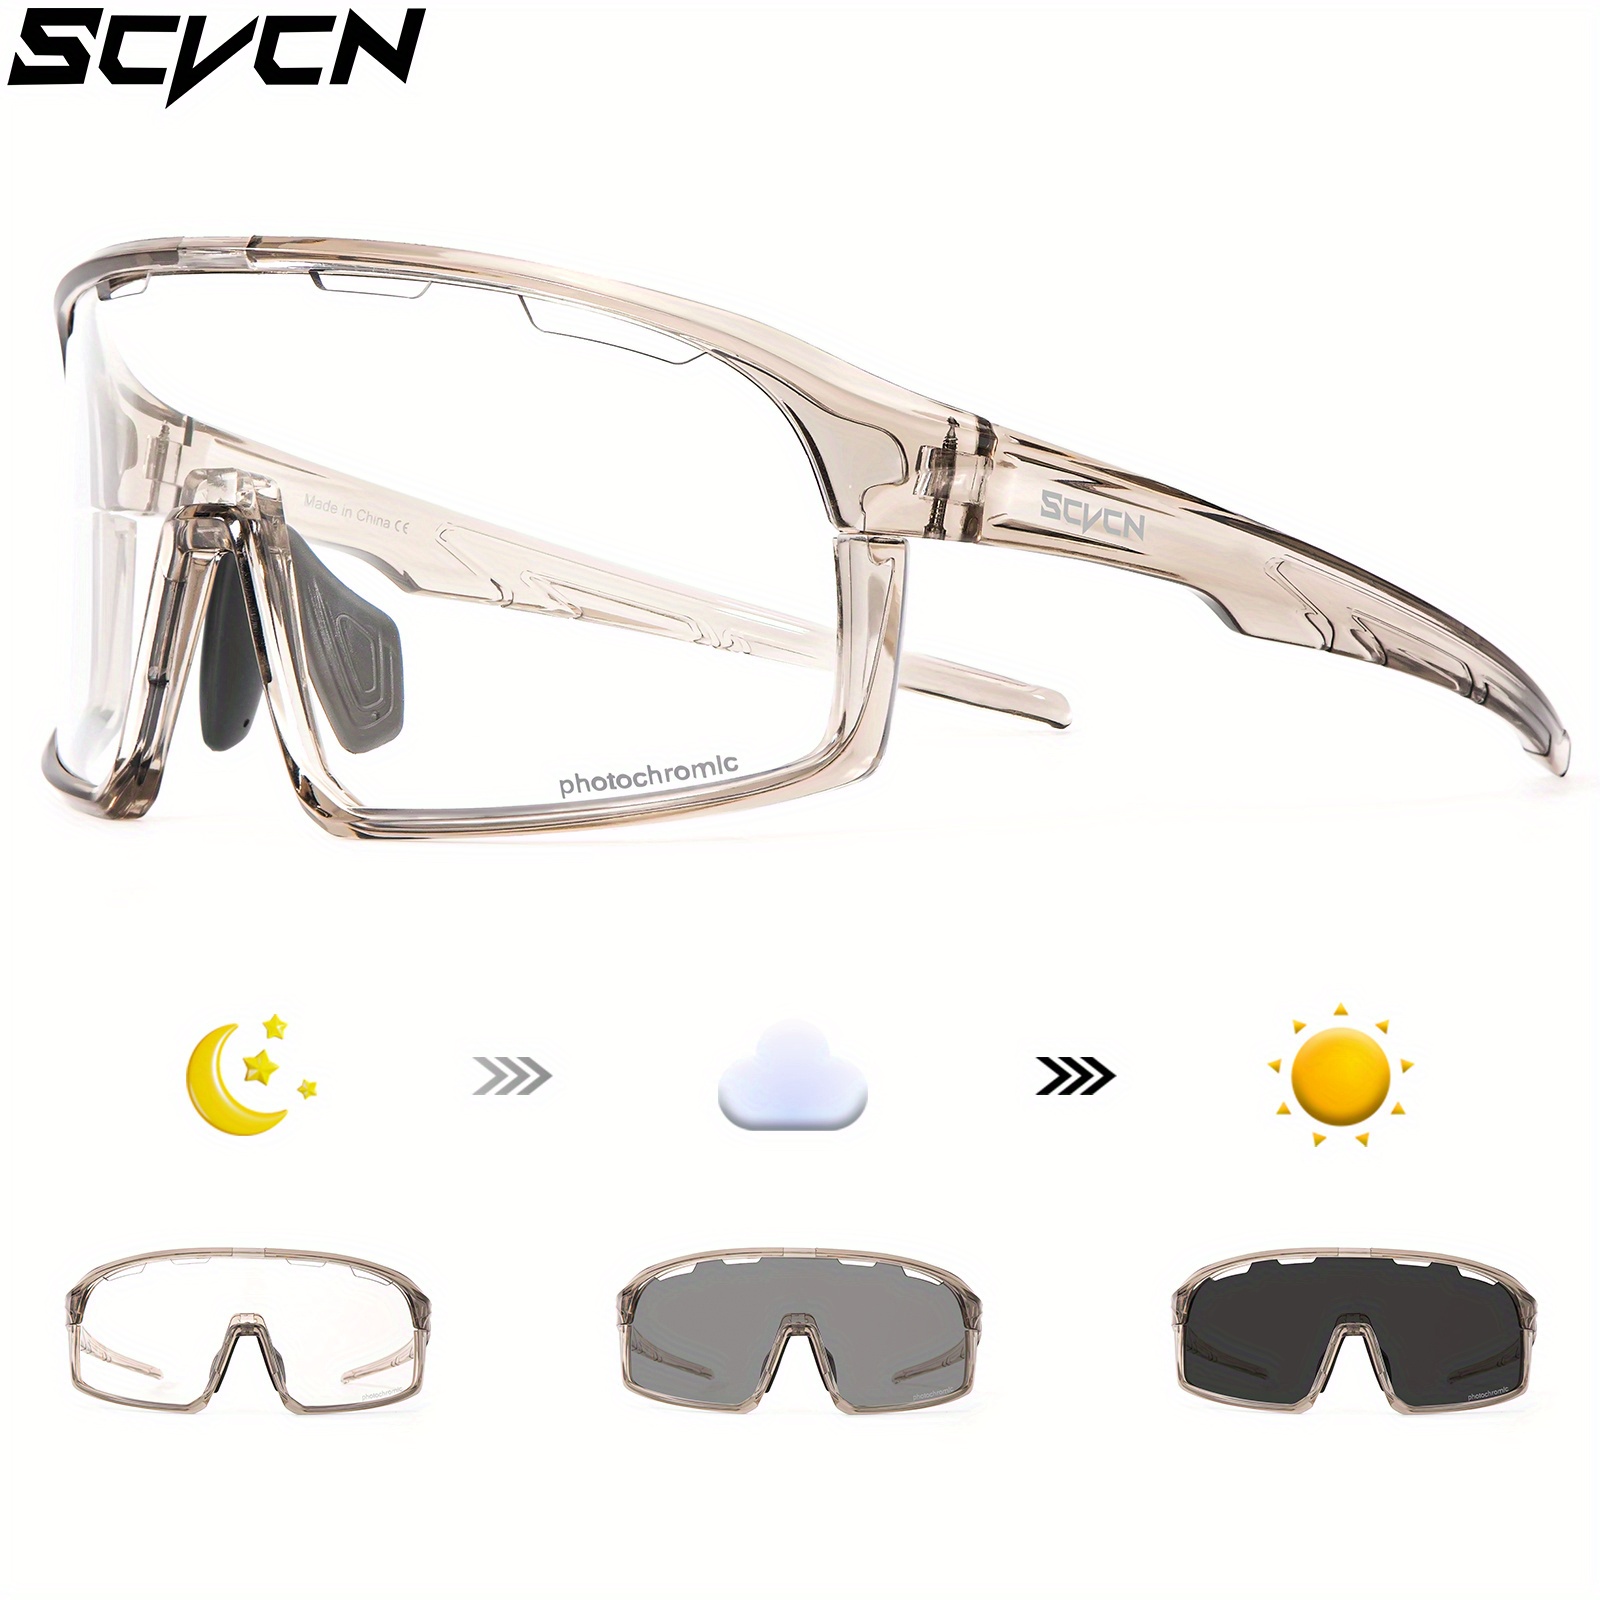 

Scvcn Photochromic Sports Fashion Glasses For Men & Women - Lightweight, Flexible Frame For Cycling, Golf, Fishing | Color-changing Lenses For Outdoor Activities